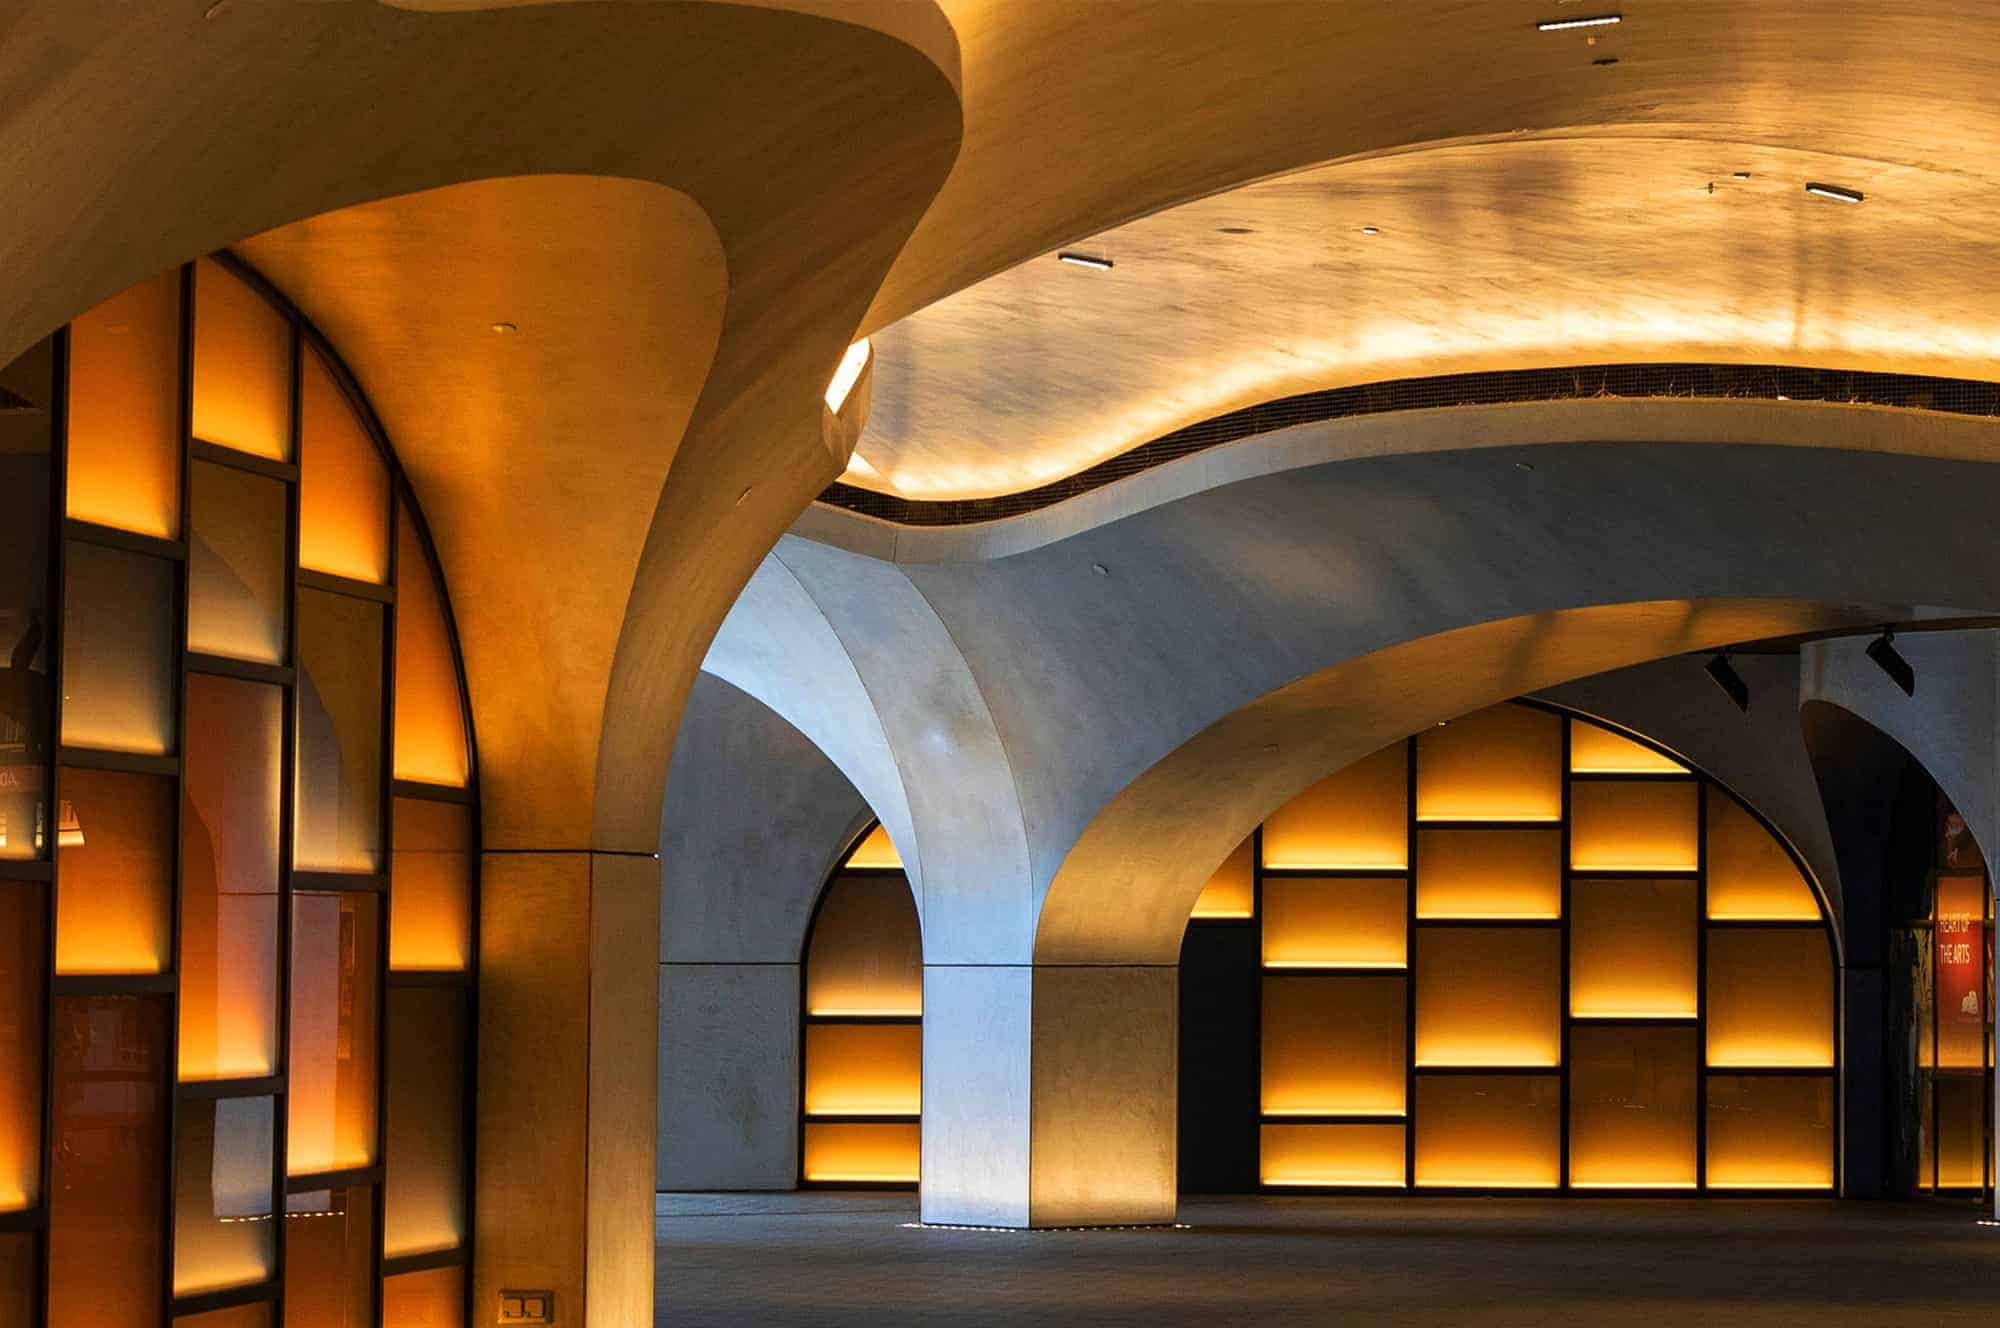 An illuminated modern interior with curved architecture and warm lighting.